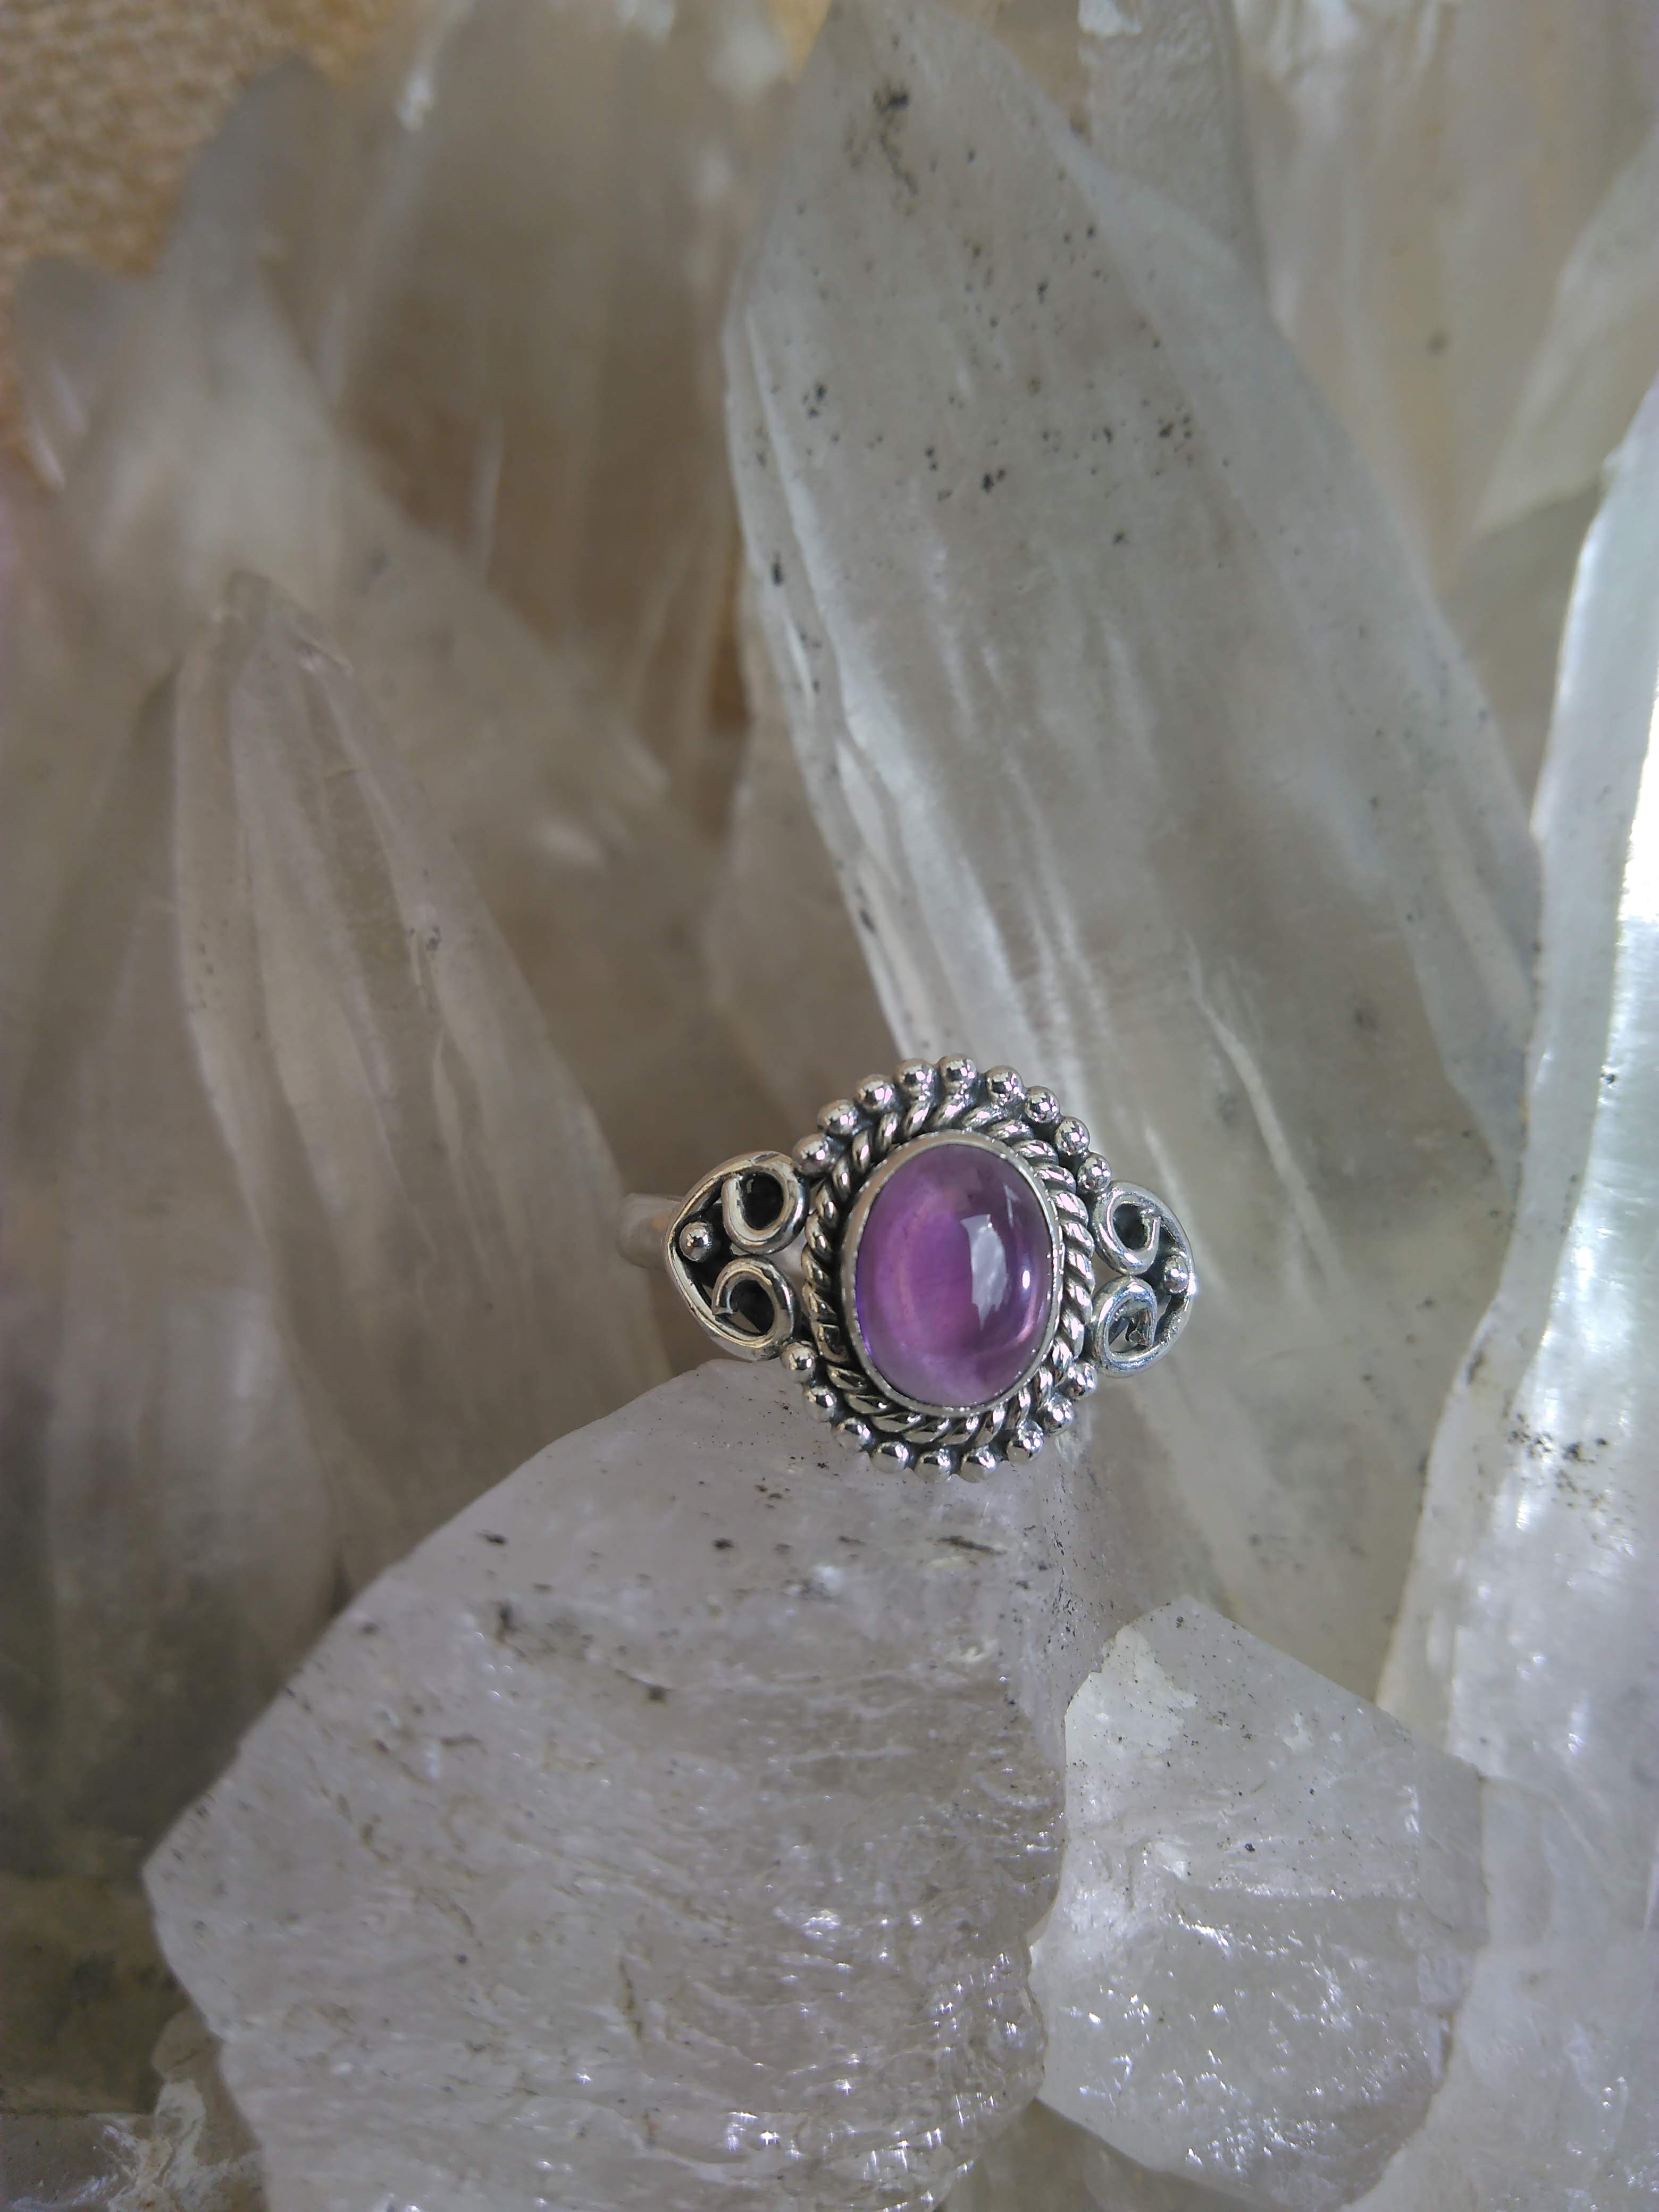 Amethyst, Lapis or Black Onyx Ring Set in 925 Sterling Silver